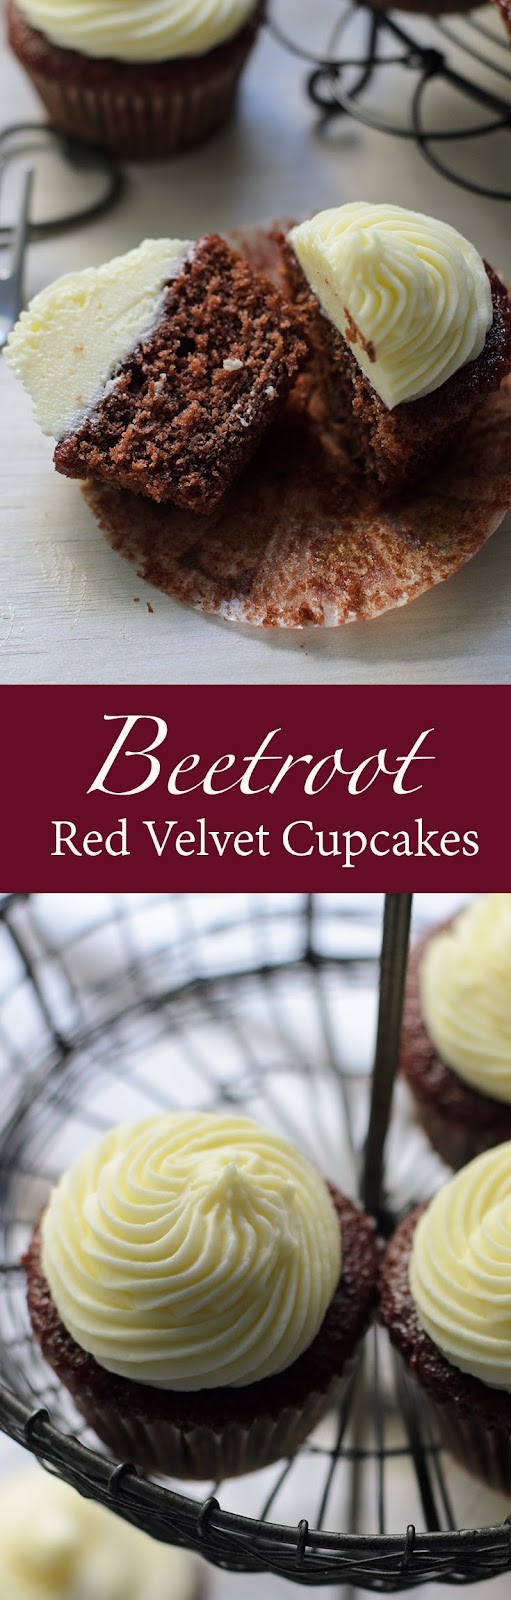 Red velvet cupcakes recipe.  No food colouring is added to these delicious Red velvet cupcakes. Roasted beetroot were used to give that deep red colour to these red velvet cupcakes.